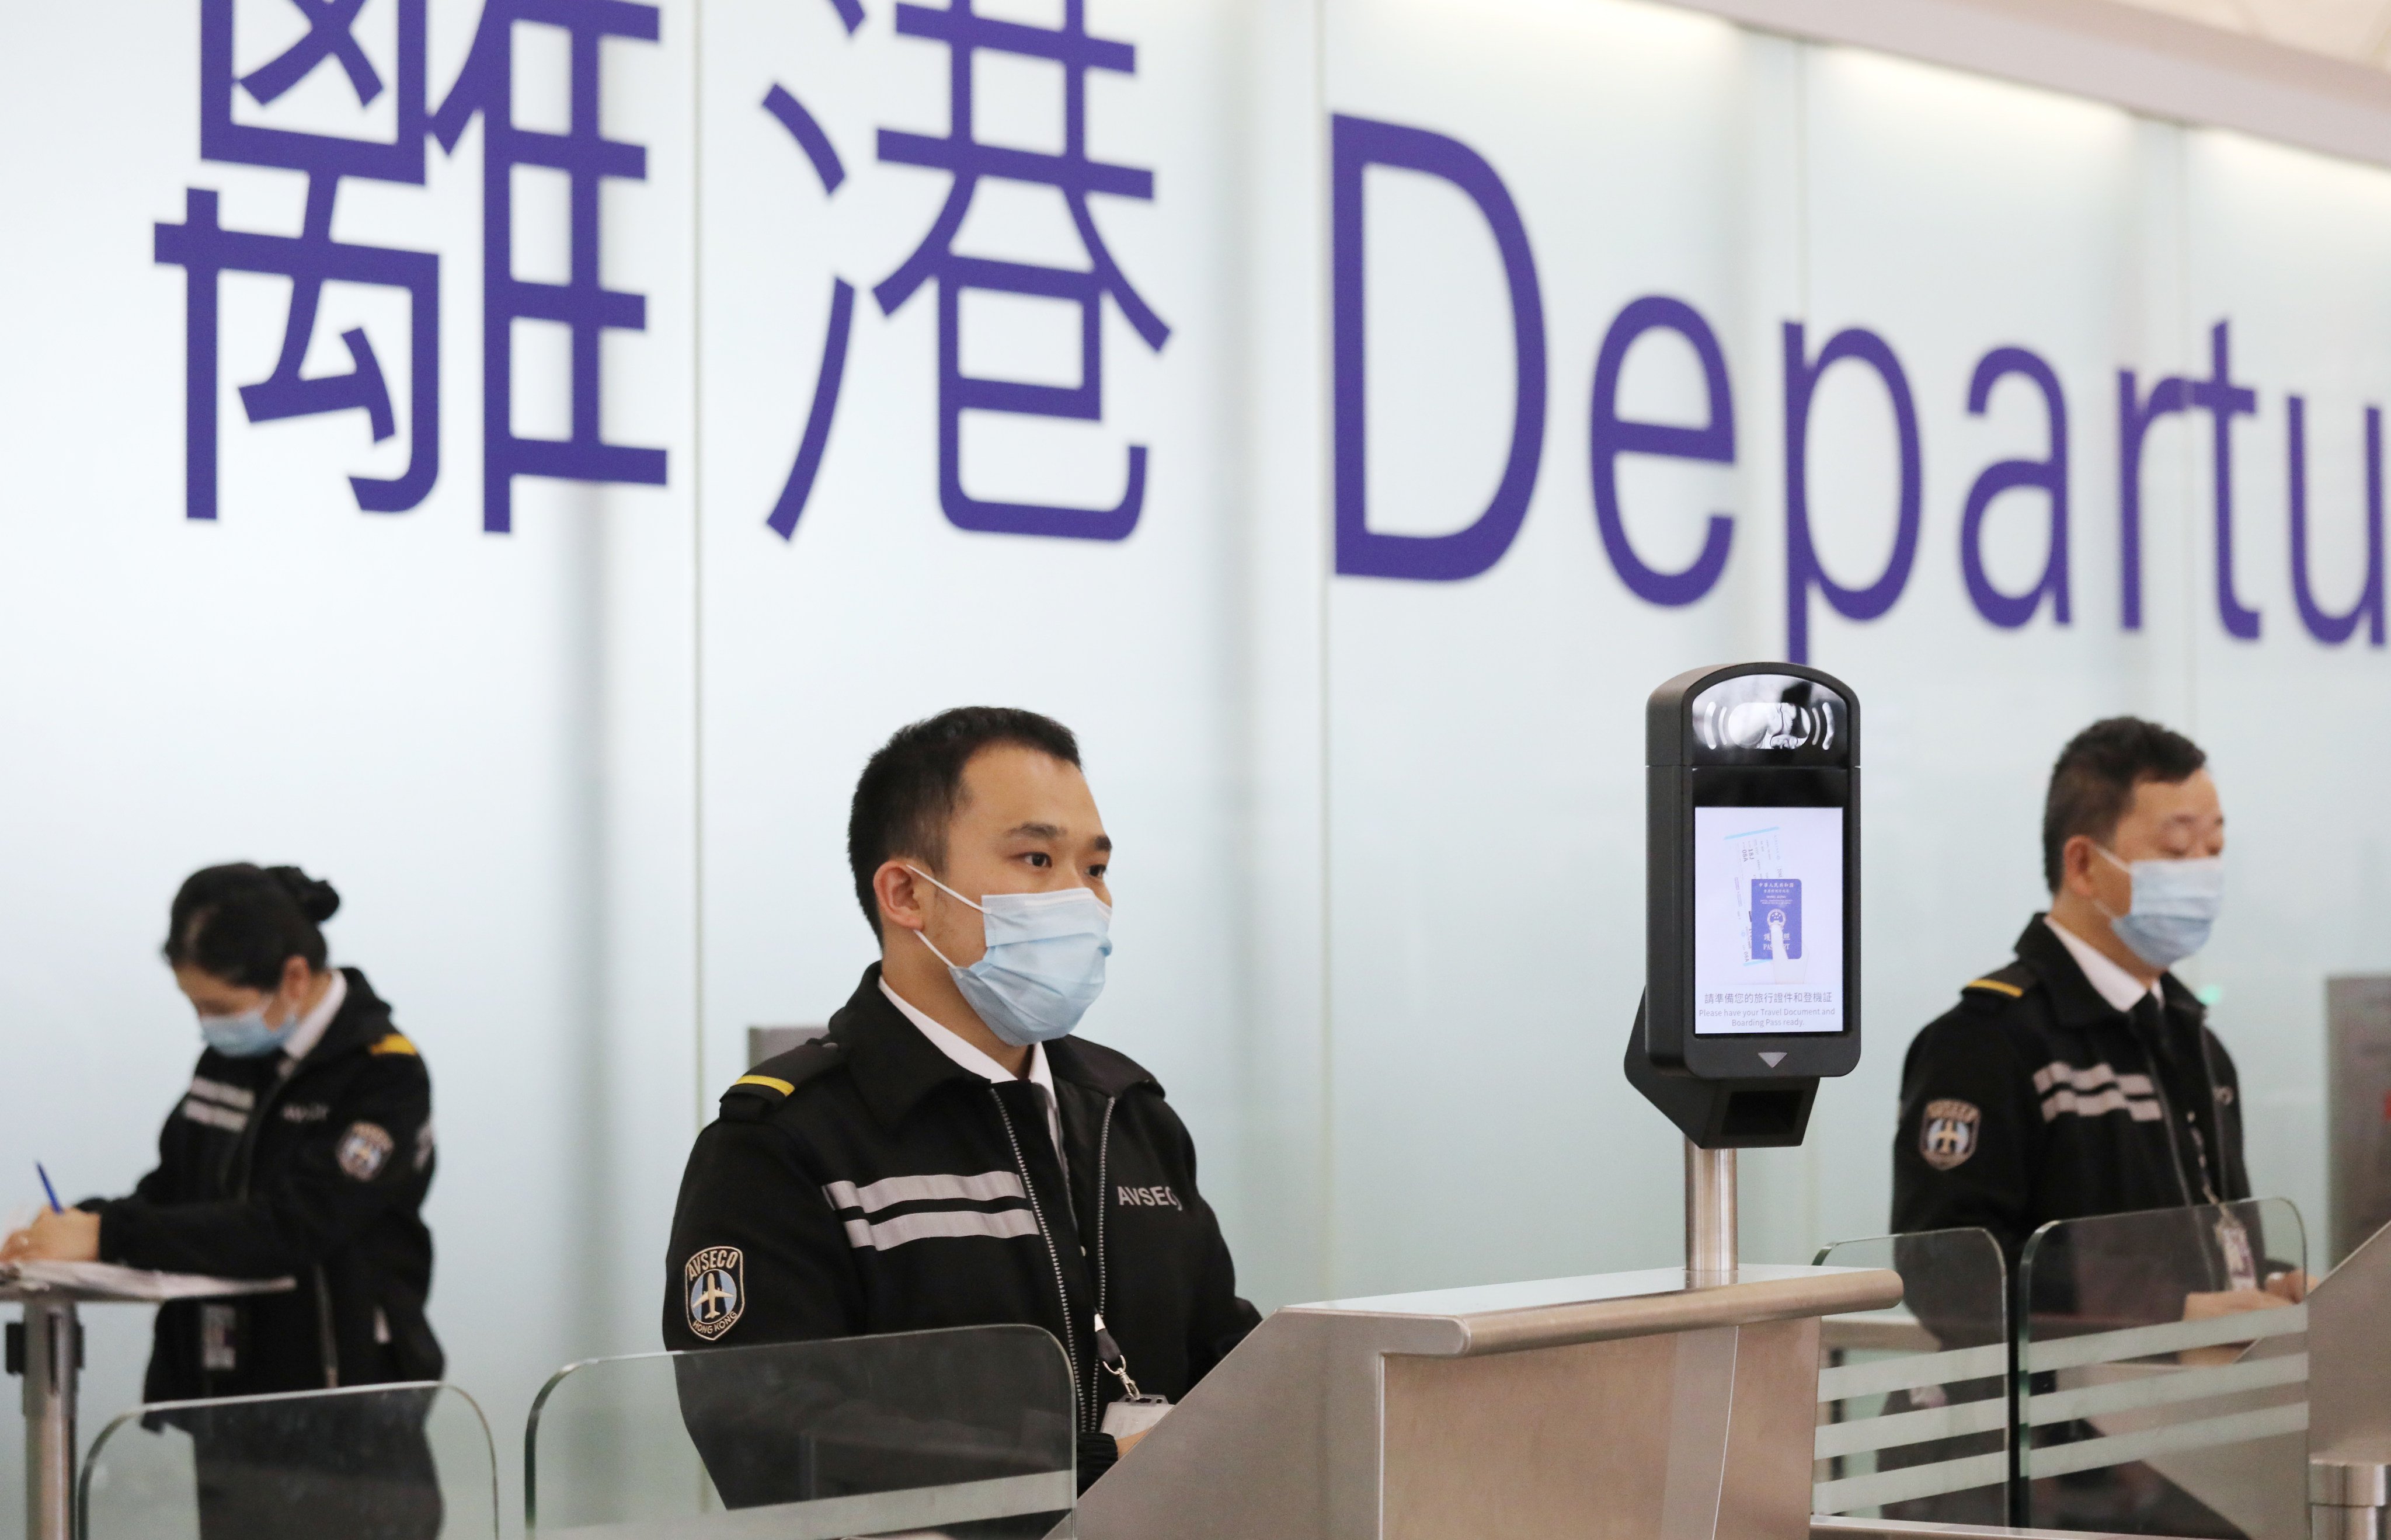 Staff at the Hong Kong International Airport. A security fee for passengers flying out of Hong Kong will be raised from HK$55 to HK$65 starting i mJanuary 2025. Photo: Dickson Lee